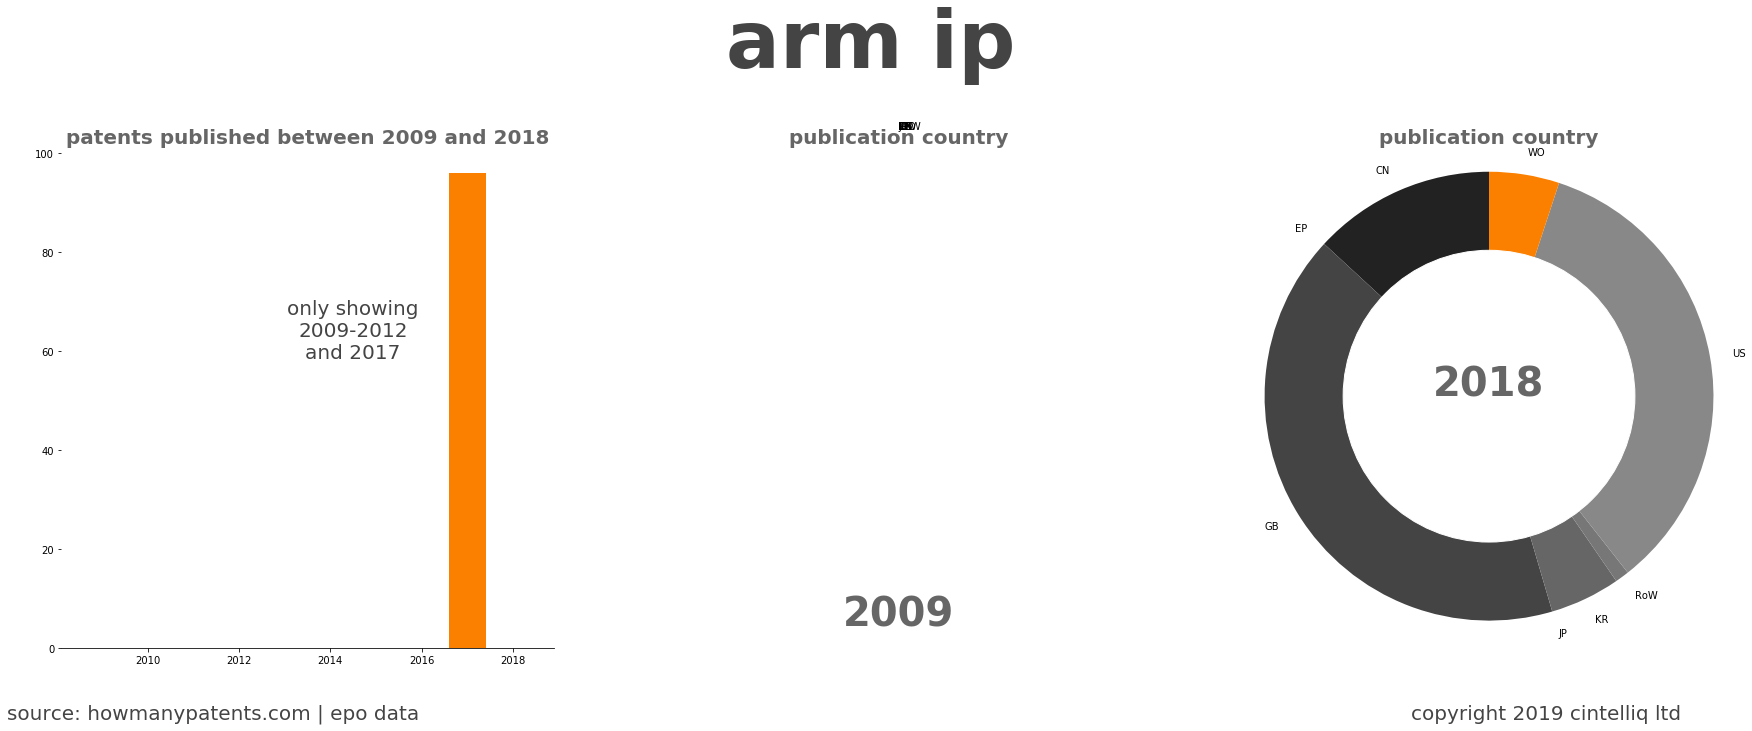 summary of patents for Arm Ip